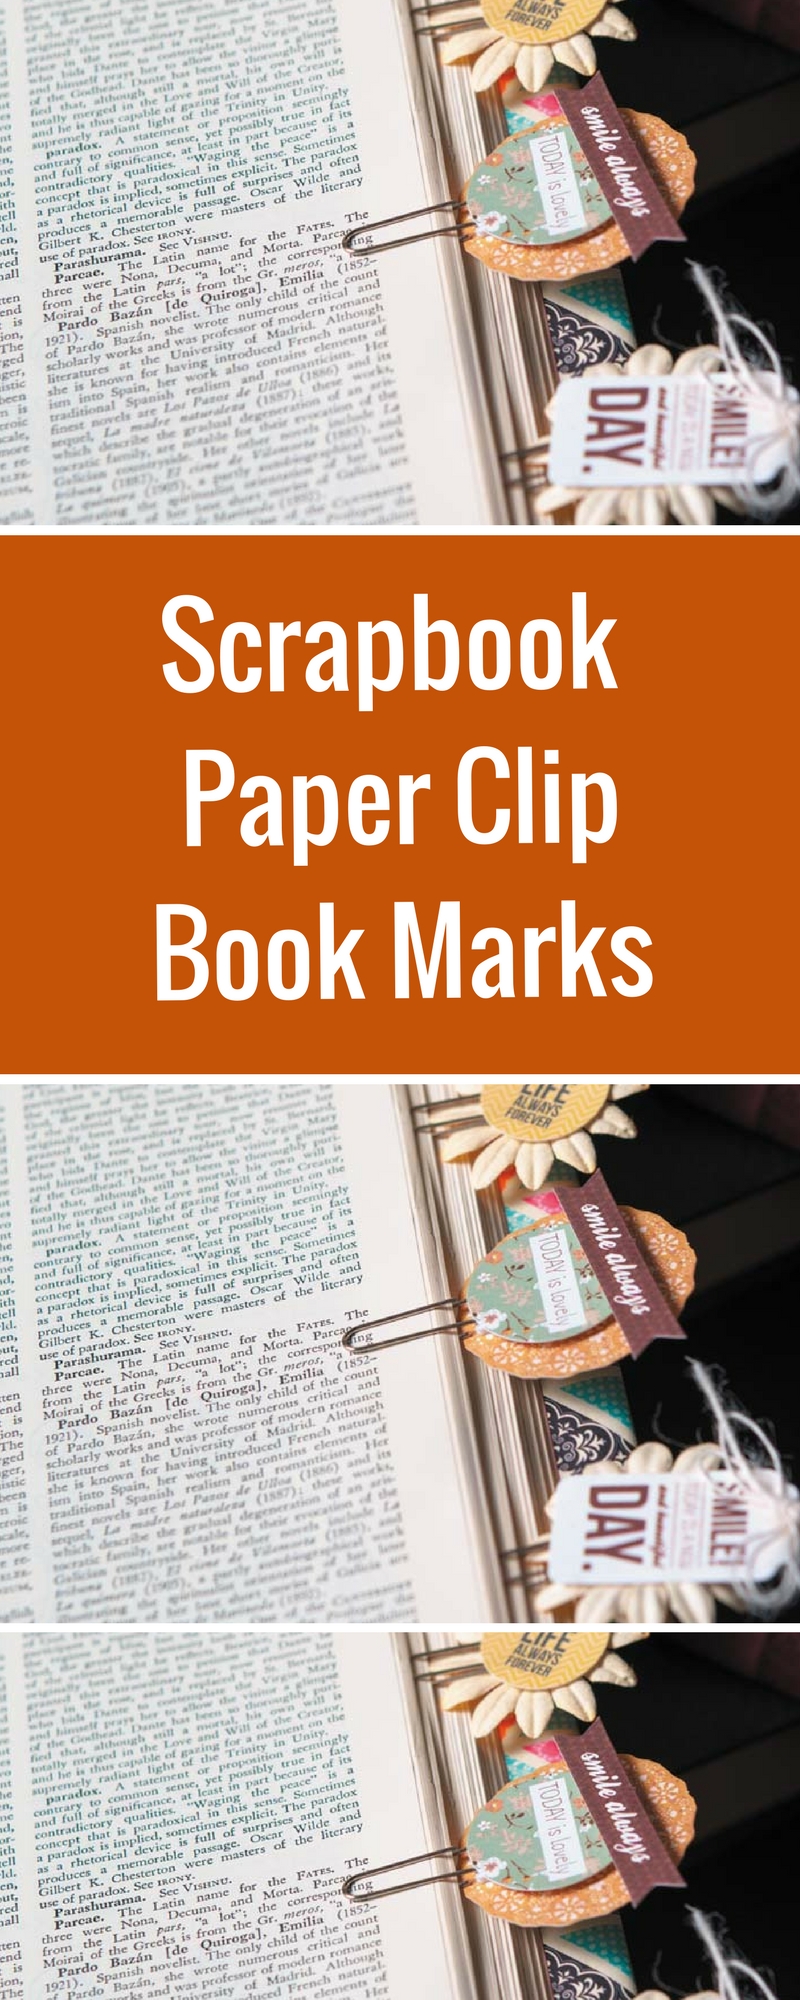 Back To School | Paper Craft Projects | Designed by Christy Riopel | Creative Scrapbooker Magazine #backtoschool #papercrafts